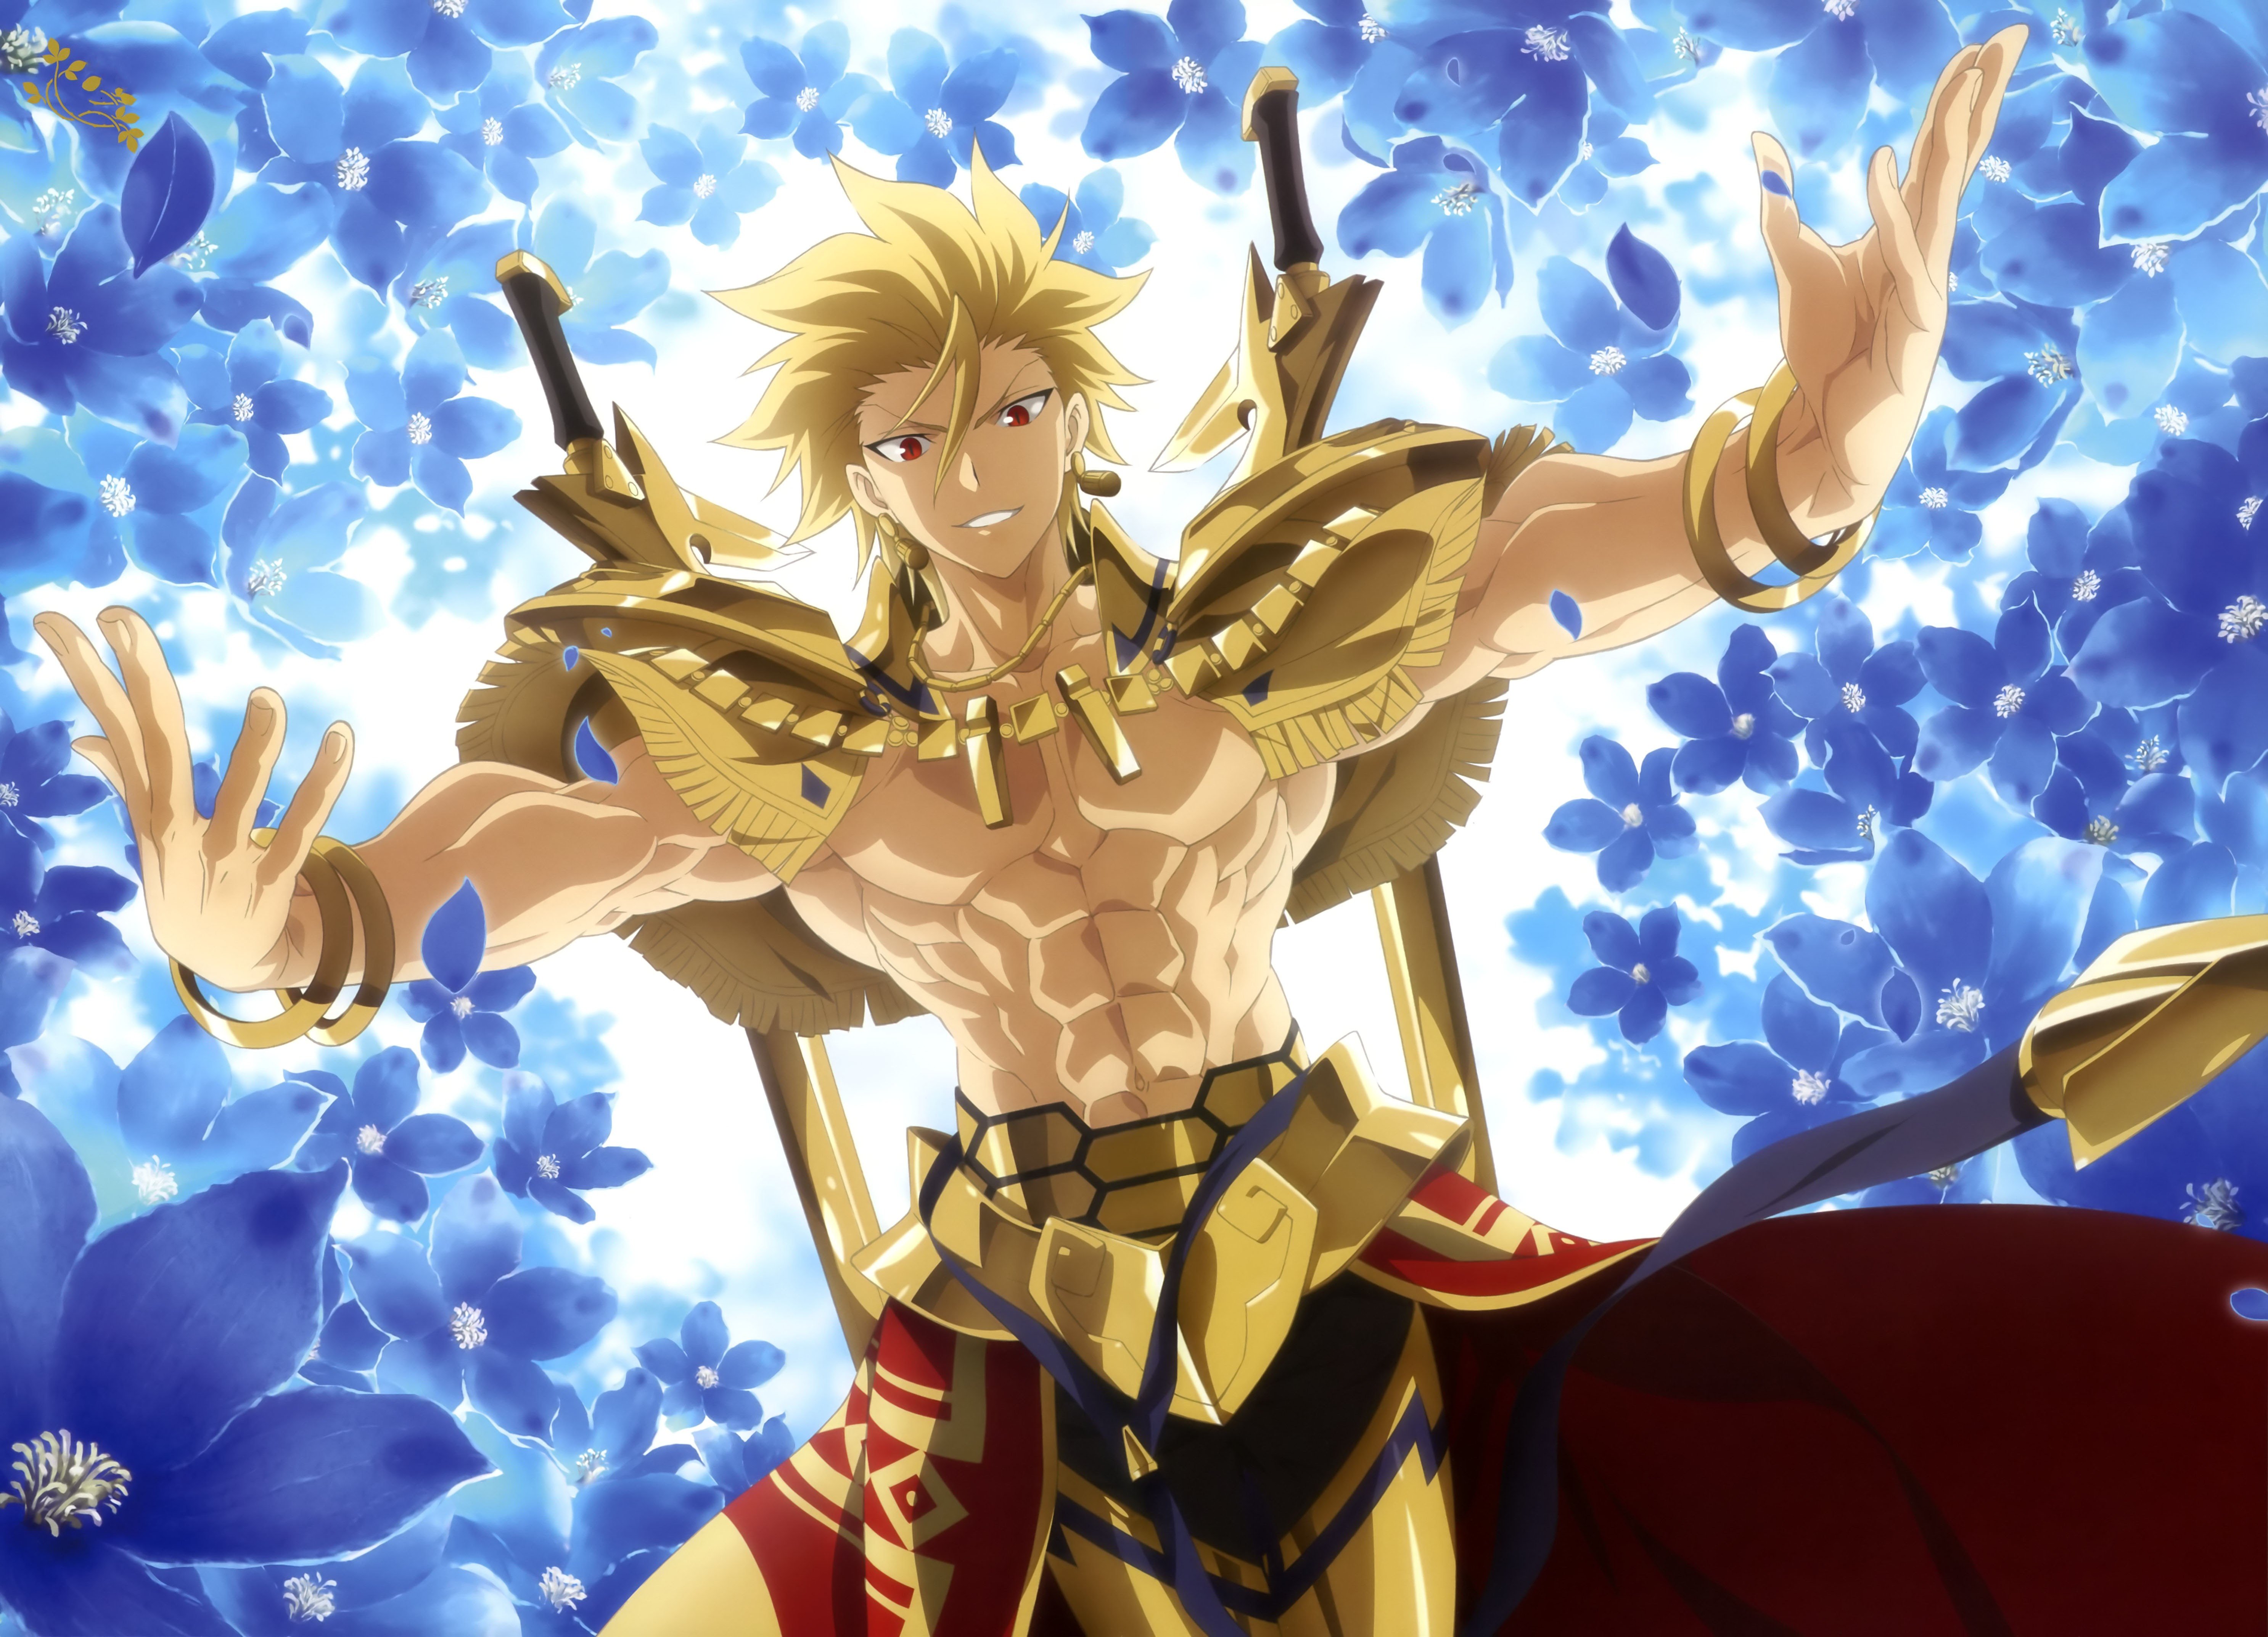 Fate Prototype, Gilgamesh, Red eyes, Anime, Short hair, Blonde, Anime boys  Wallpapers HD / Desktop and Mobile Backgrounds